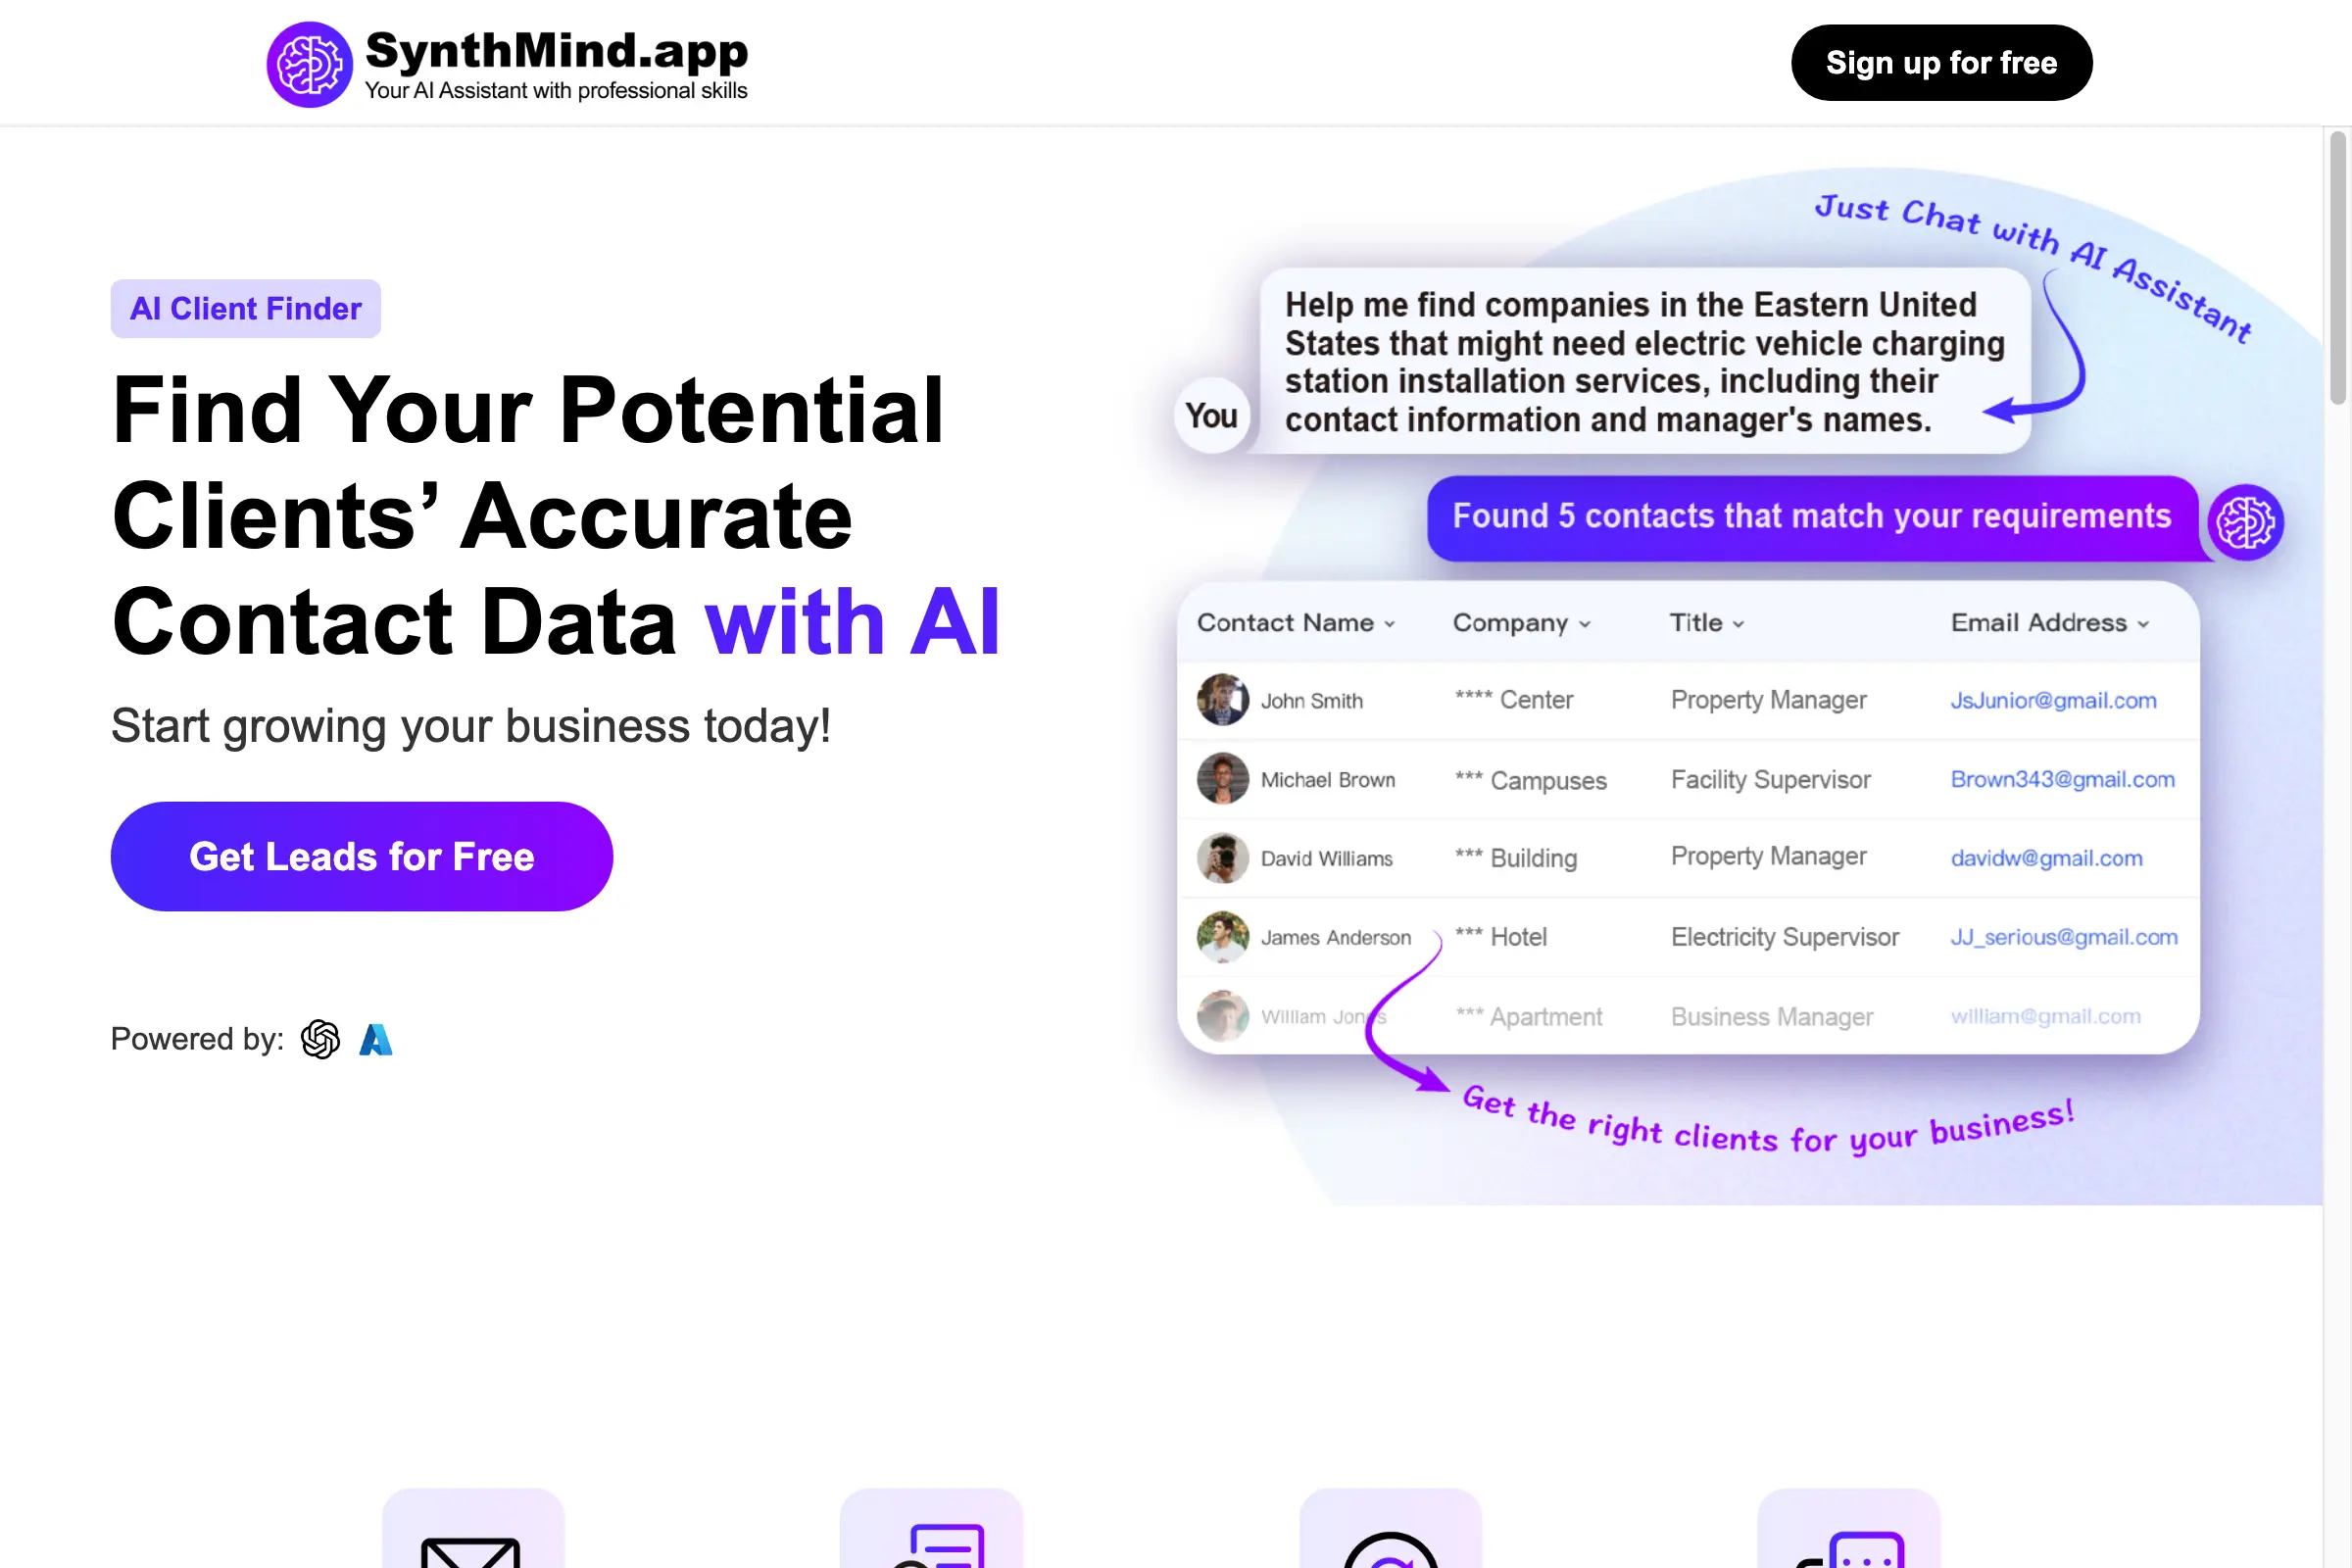 AI Client Finder by SynthMind